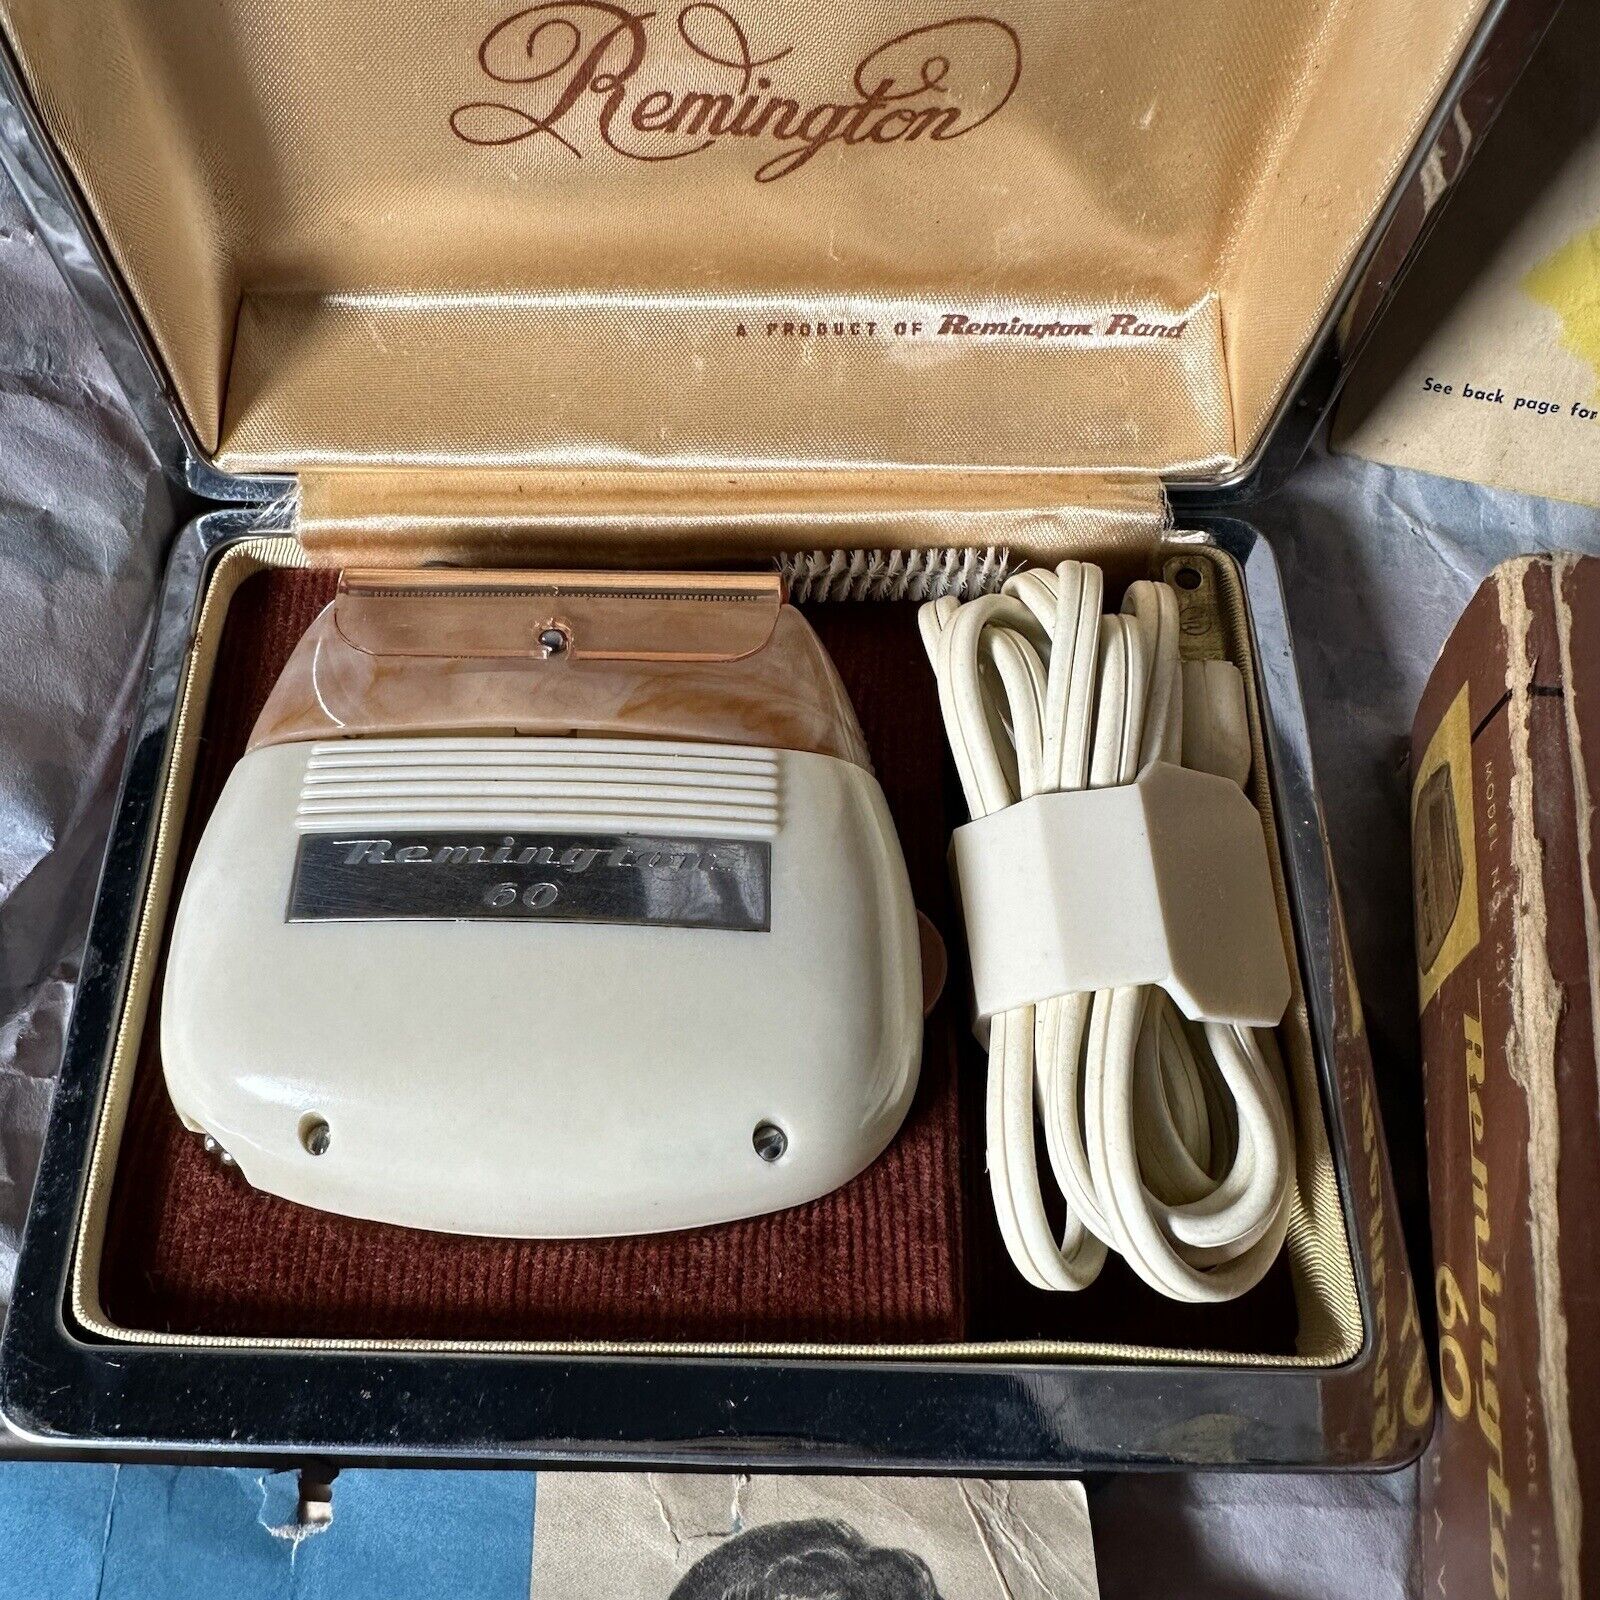 VINTAGE 1940’s REMINGTON 60 ELECTRIC SHAVER IN THE BOX Movie Prop/Collectable